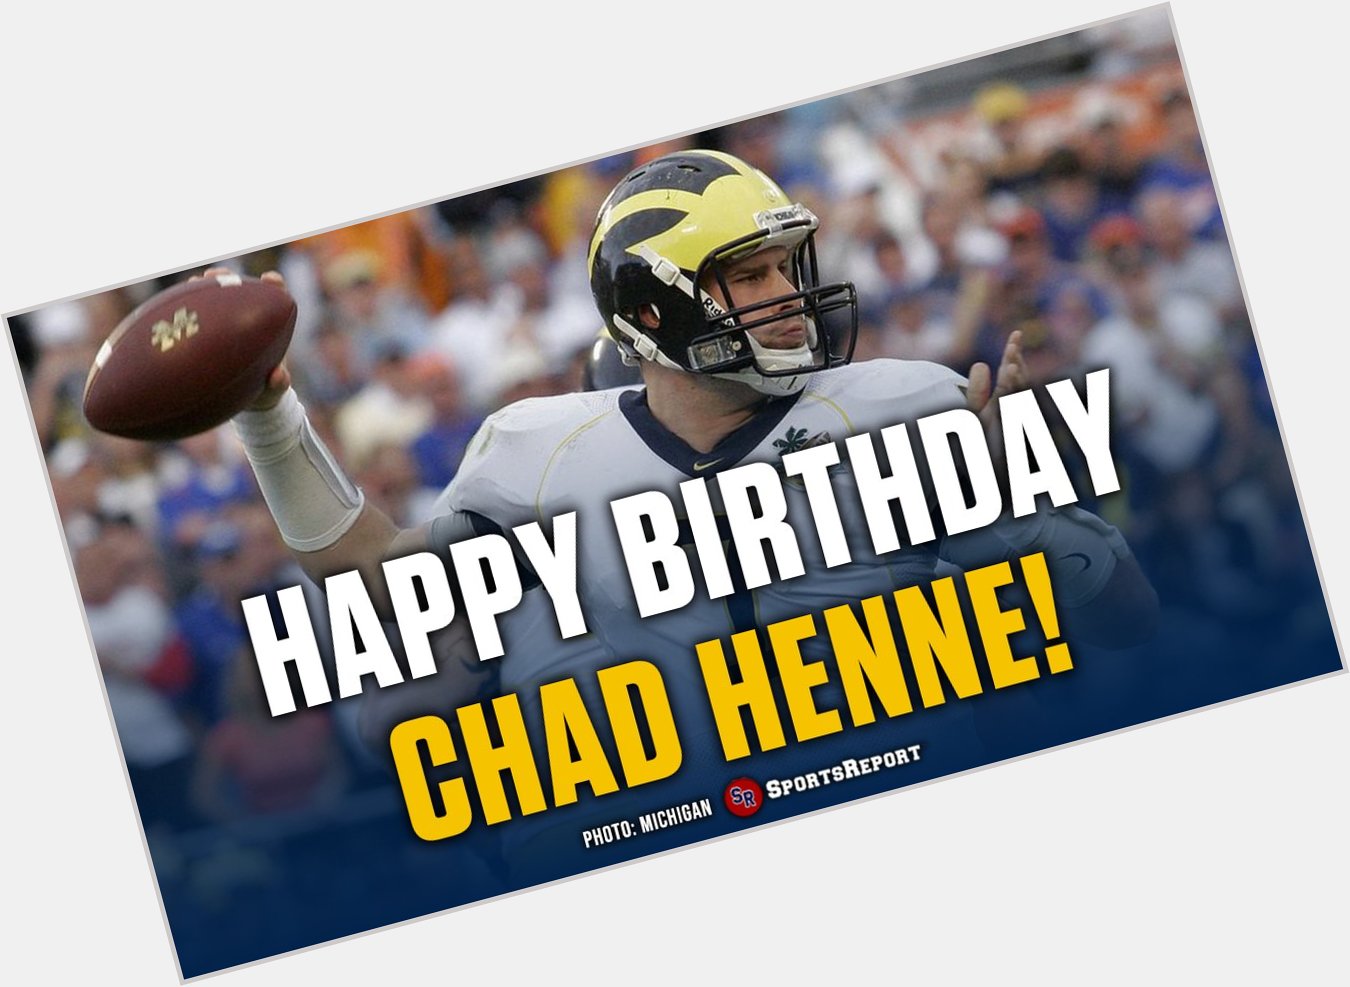  Fans, let\s wish Chad Henne a Happy Birthday! 